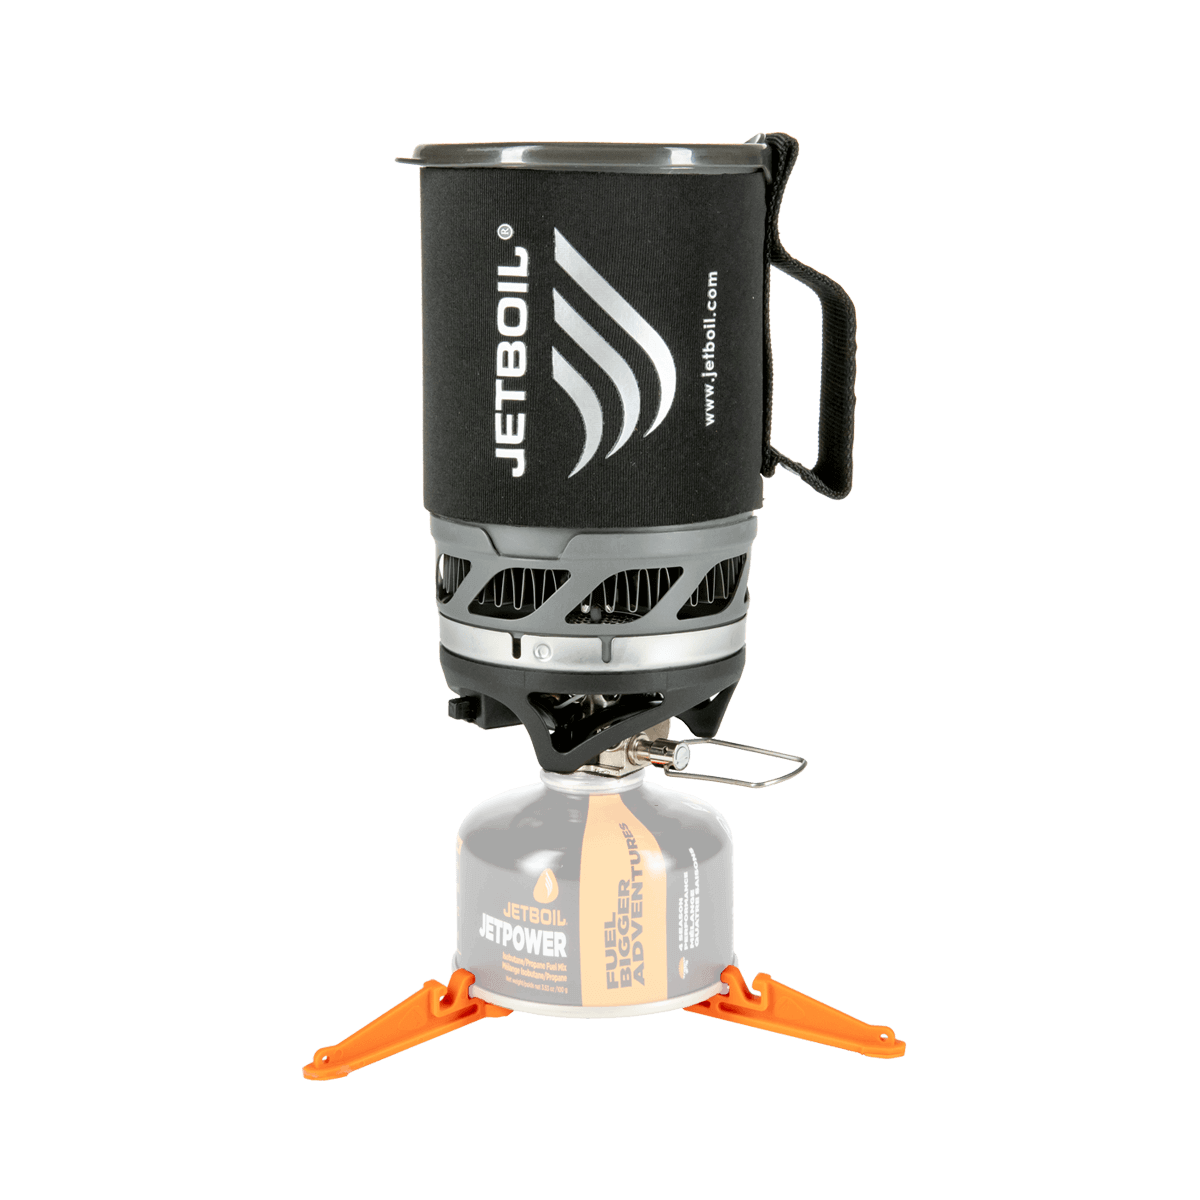 MicroMo Cooking System - Jetboil